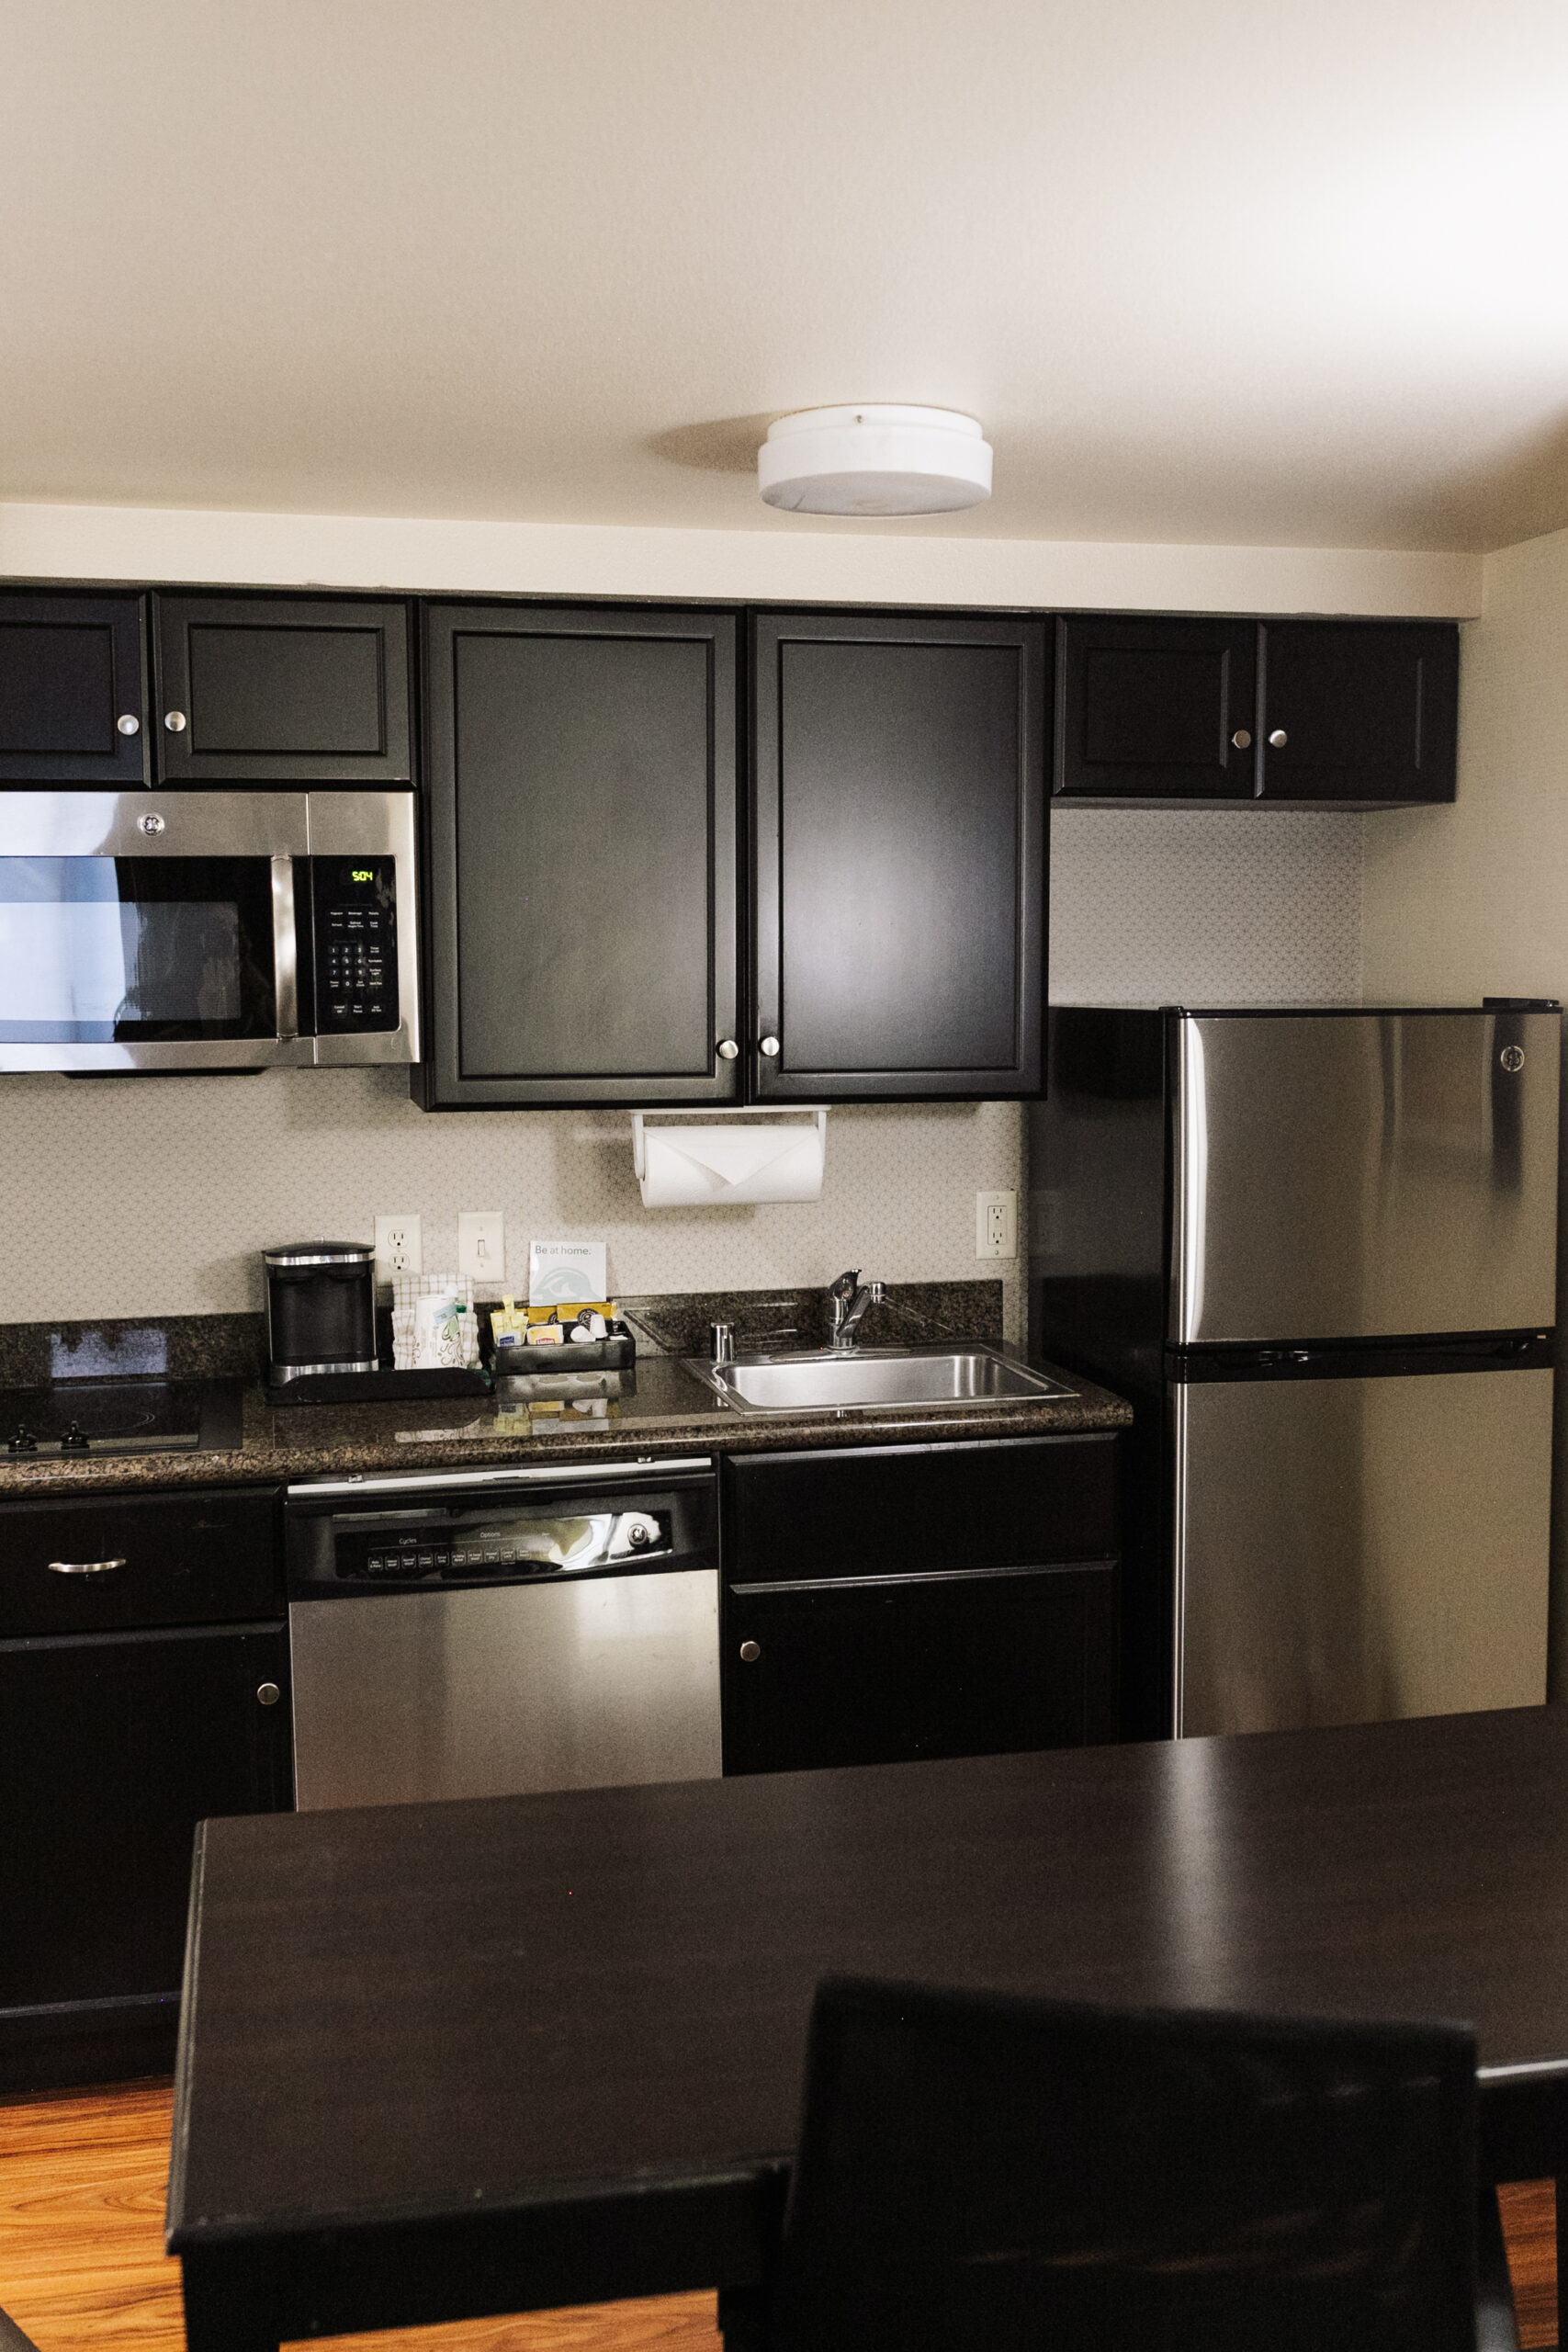 all suites at the Homewood Suites by Hilton include a full kitchen!